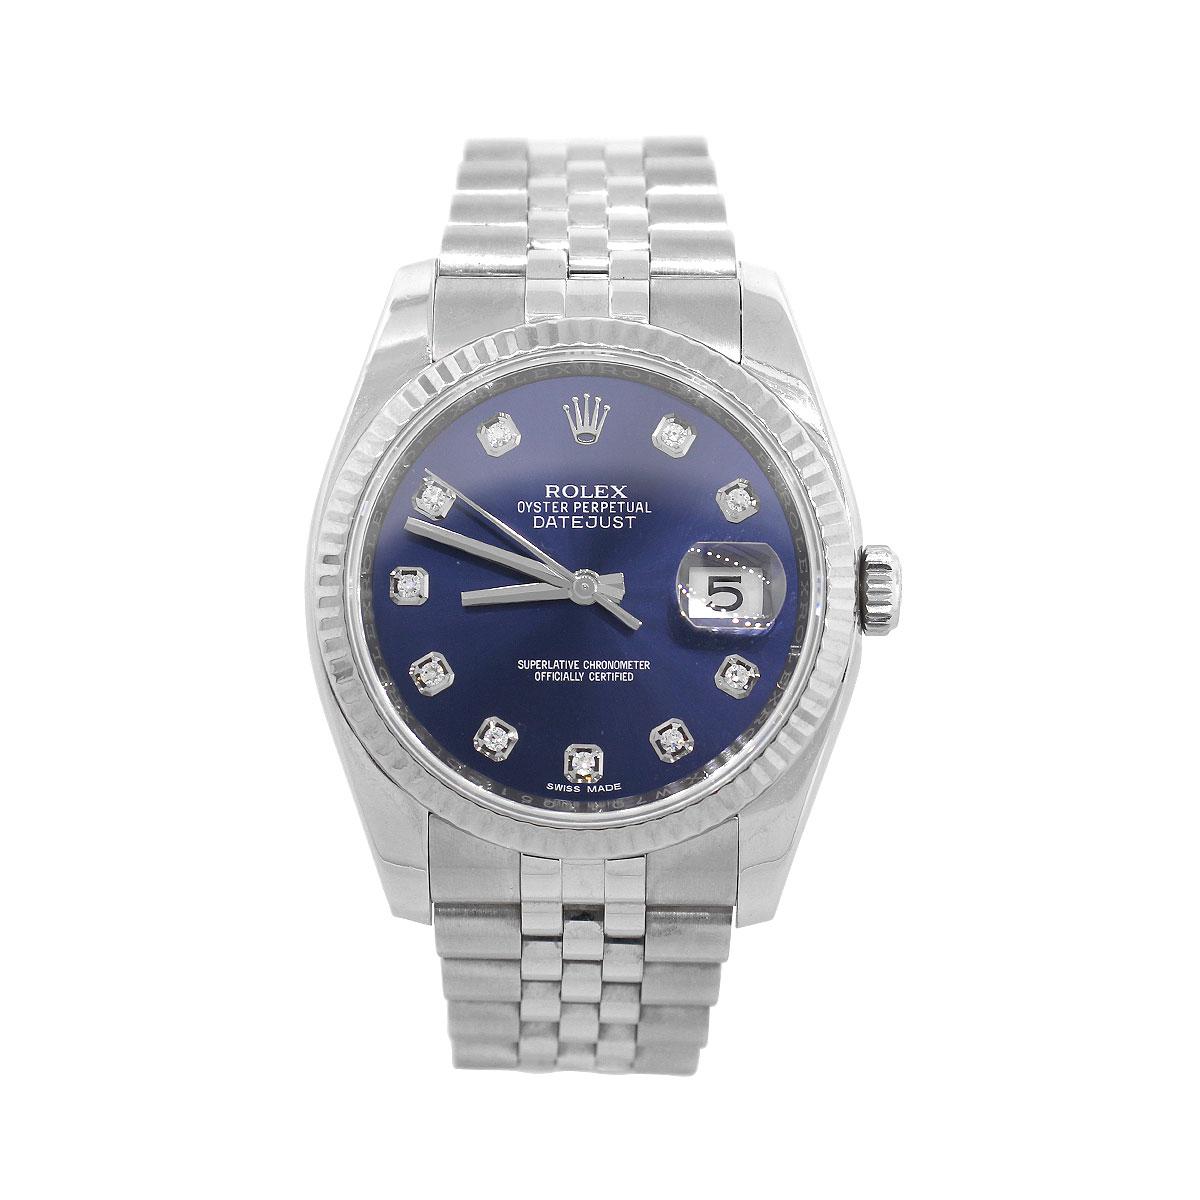 Brand: Rolex
MPN: 116234
Model: Datejust
Case Material: Stainless Steel
Case Diameter: 36mm
Crystal: Sapphire Crystal
Bezel: Stainless Steel fluted bezel
Dial: Blue dial with Silver hands and Diamond hour markers. Date can be found at 3